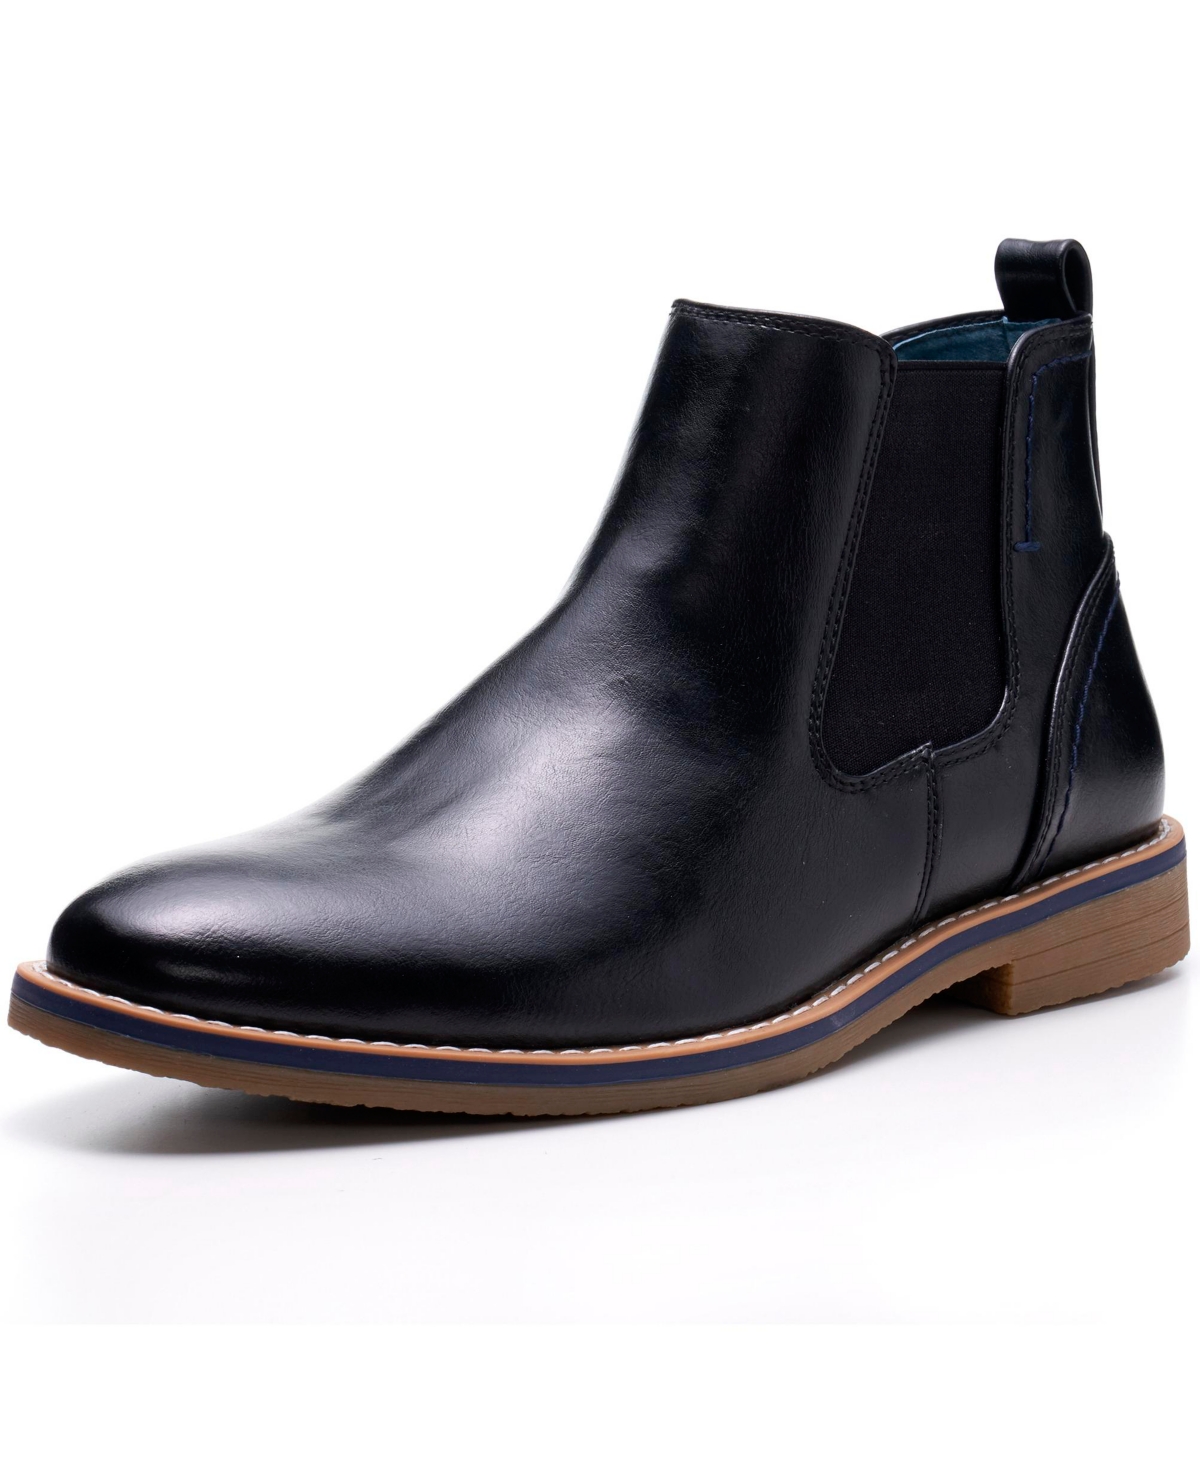 Mens Owen Chelsea Boots Pull Up Ankle Boot Genuine Leather Lined - Black